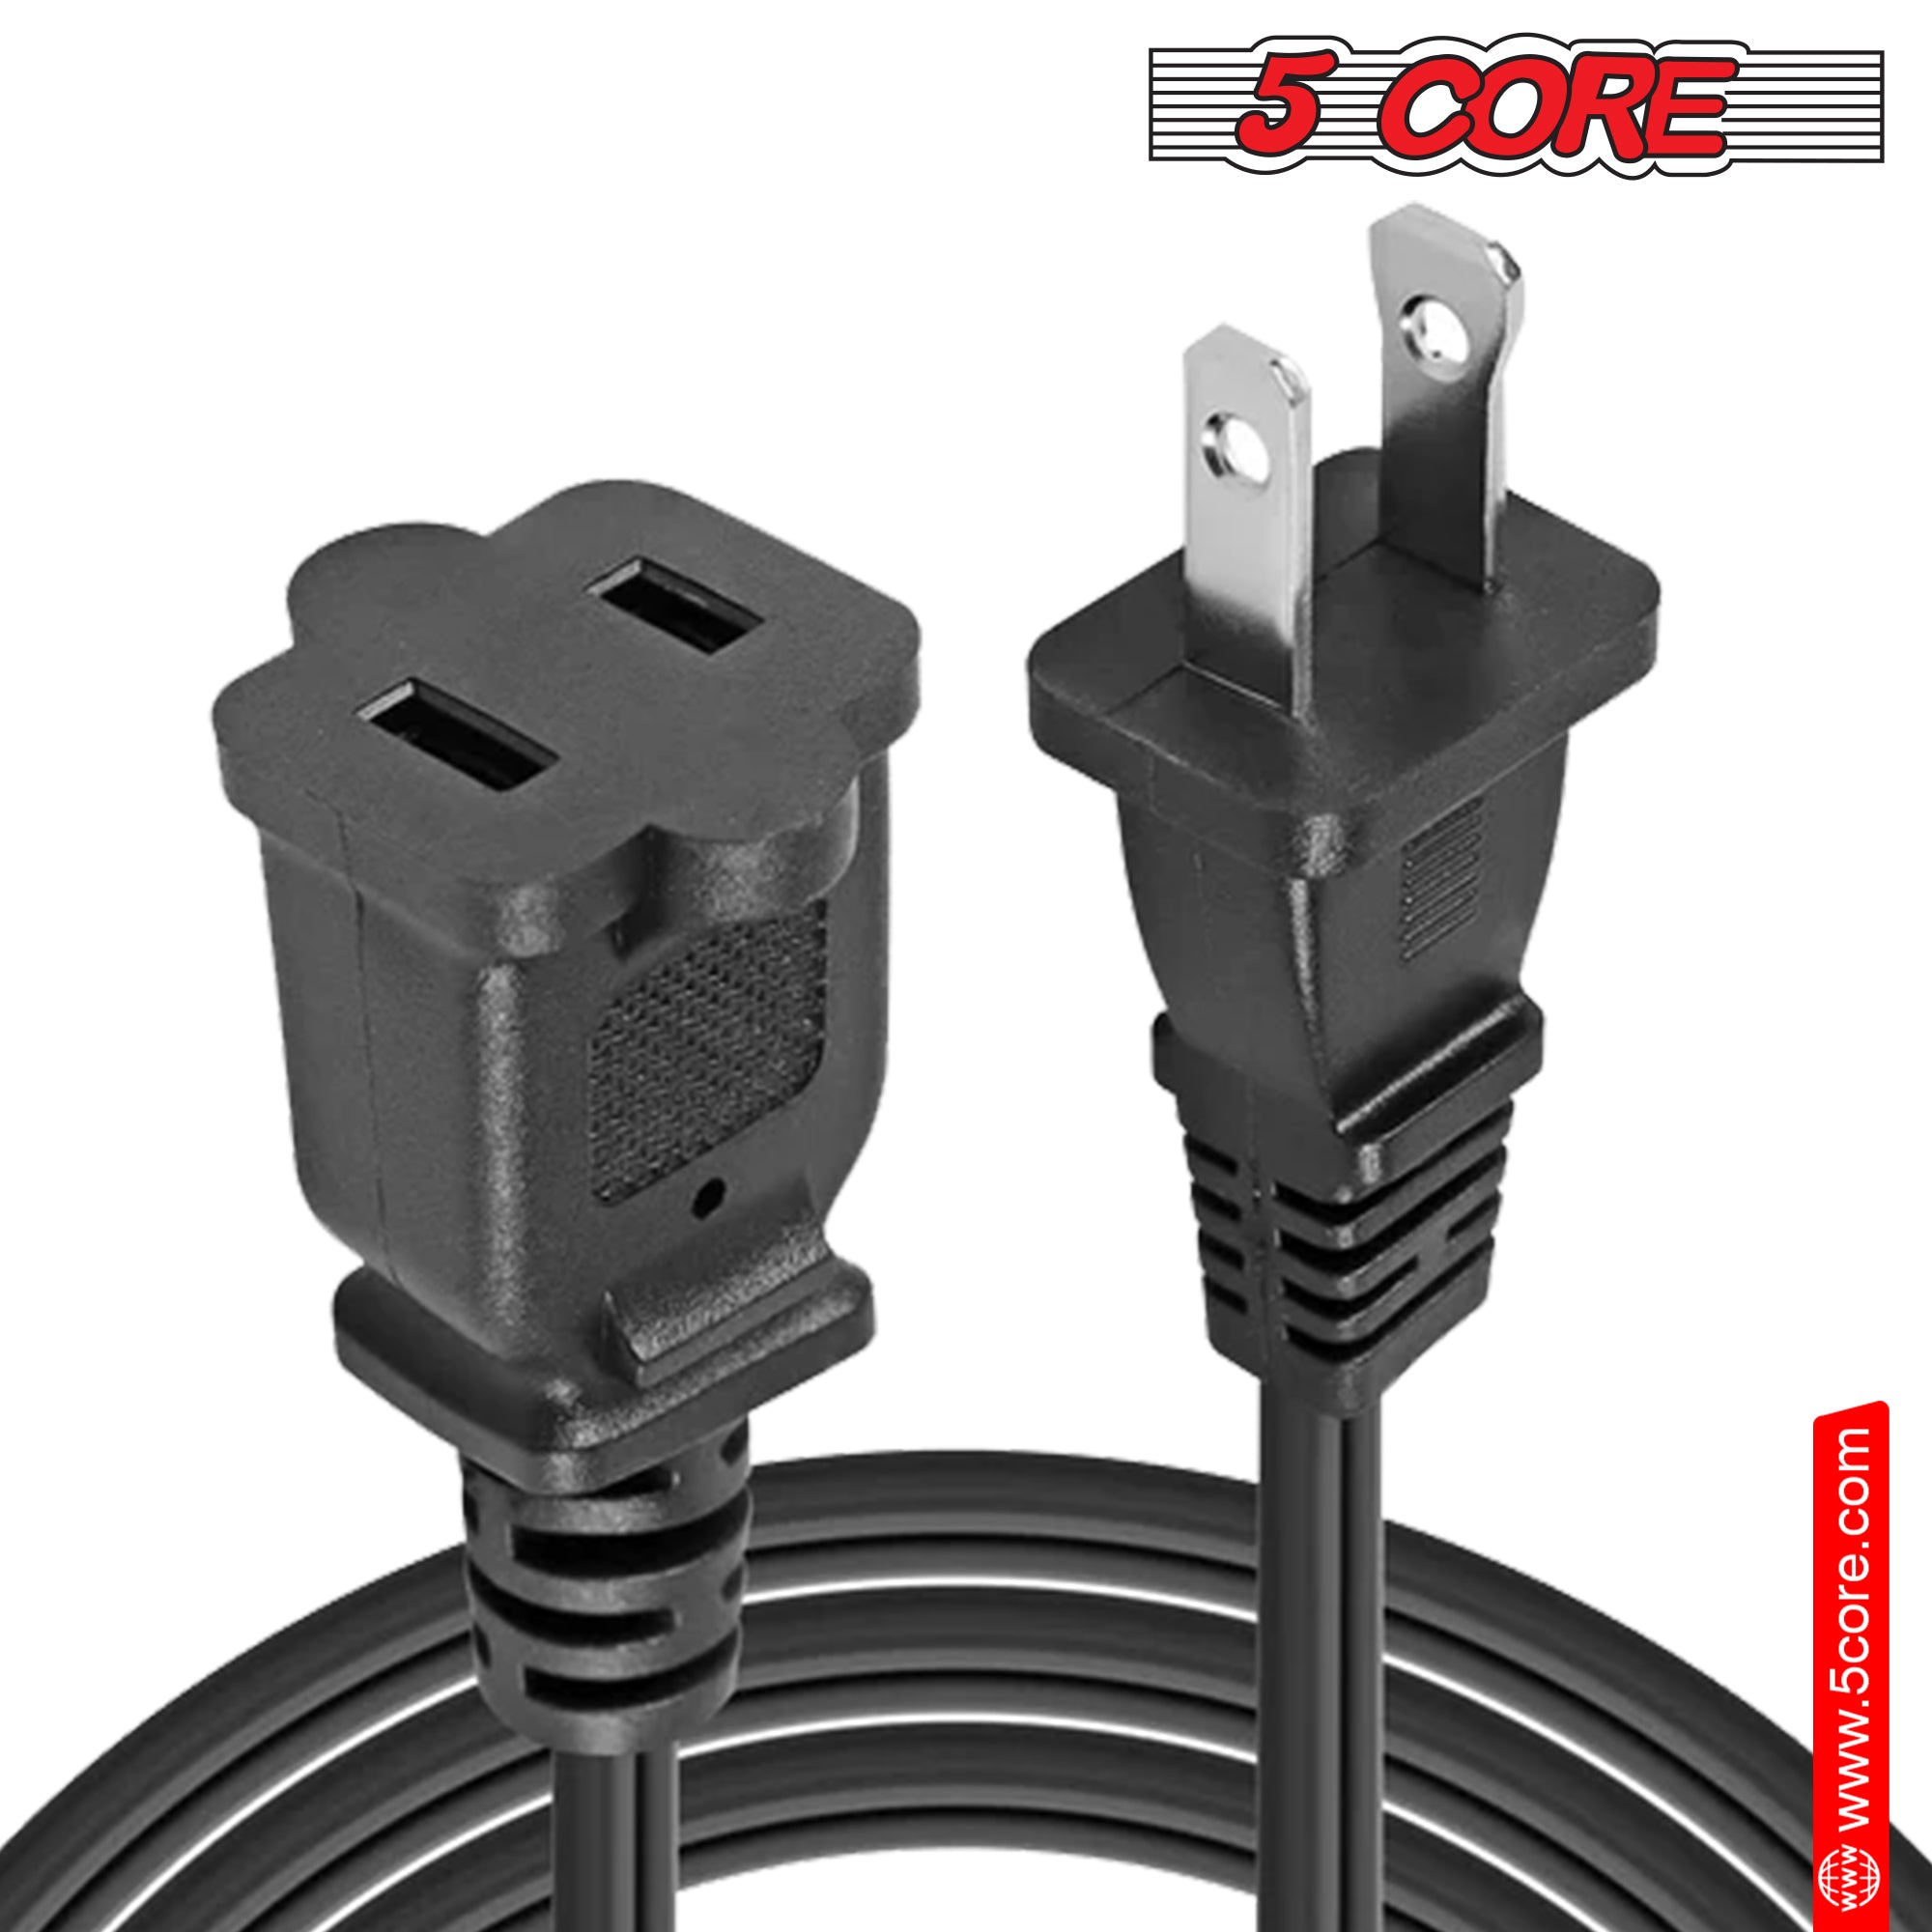 5 Core 2 Prong Extension Cord 15ft Durable Two Prong Extension Cable US AC 2 Prong Christmas Light Extension Cord Outdoor Plug Extender -EXC BLK 15FT